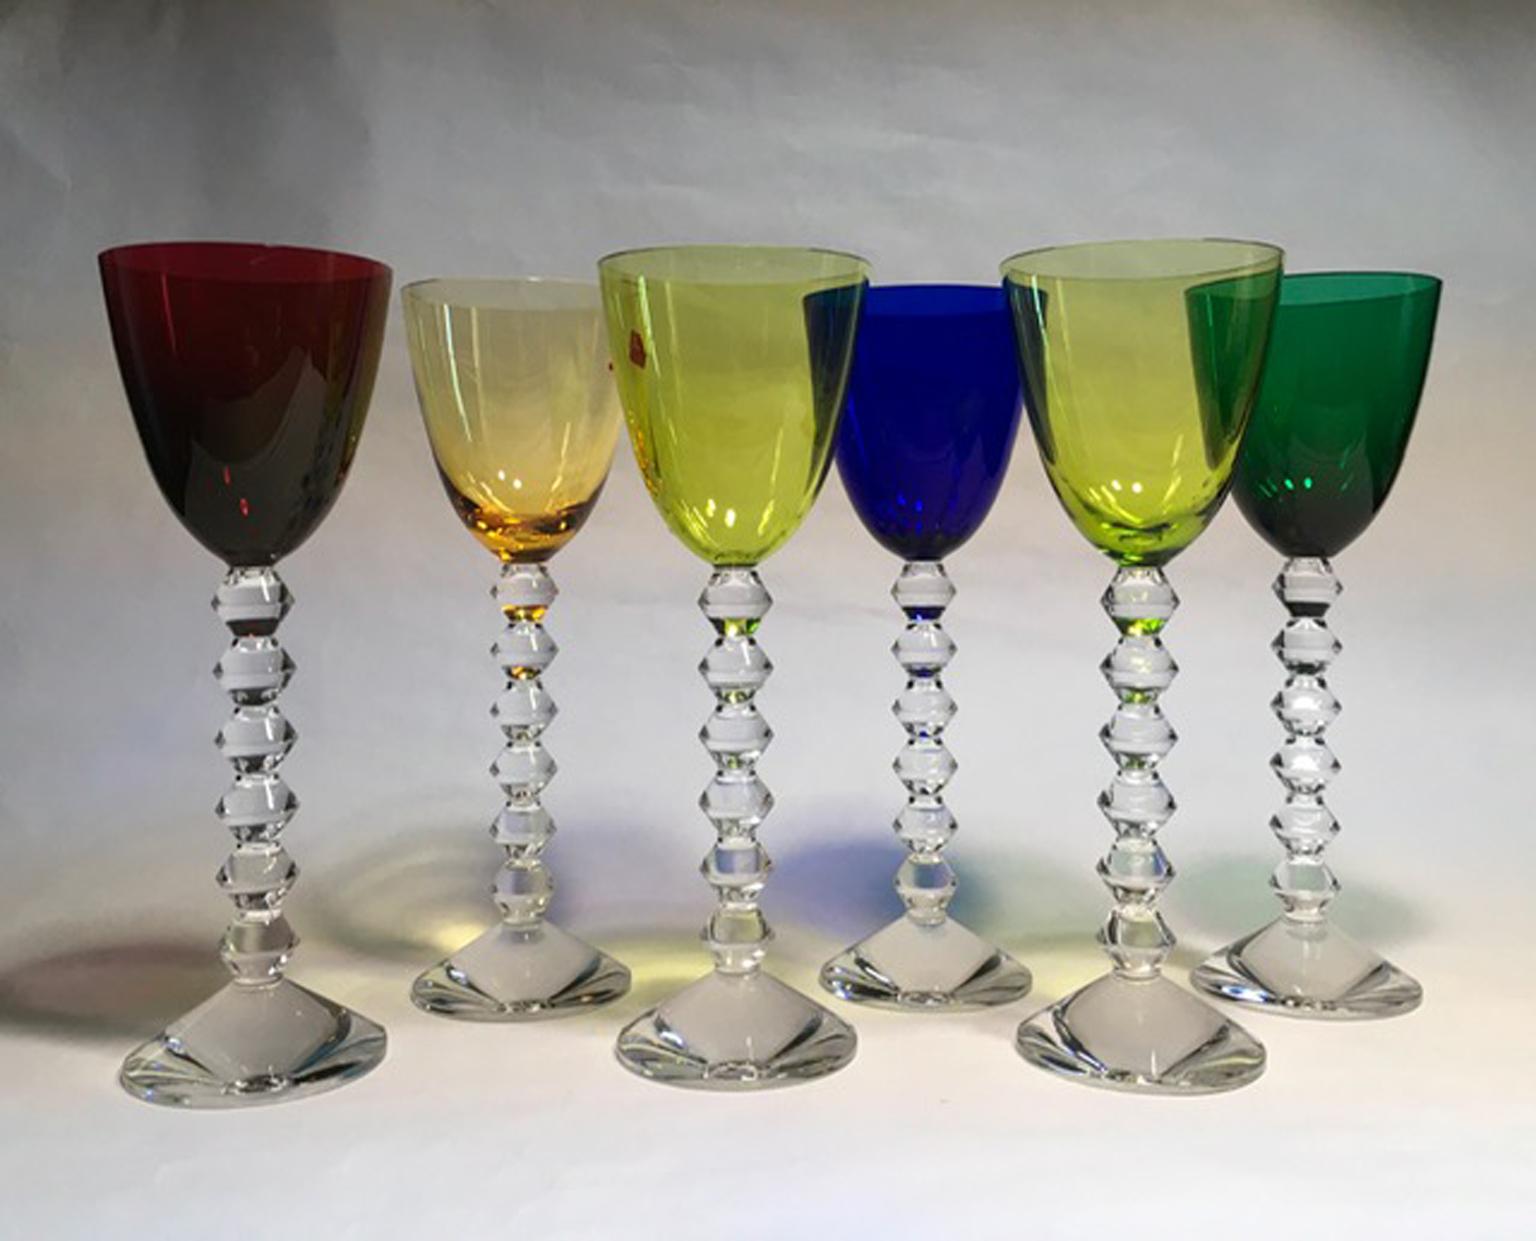 Pure and modern lines make these glasses a must for every occasion, to adorn your dining table, put and mixed together in a contemporary mix and match 
To drink in Baccarat glasses is a remarkable experience.
This glasses size are useful for wine or